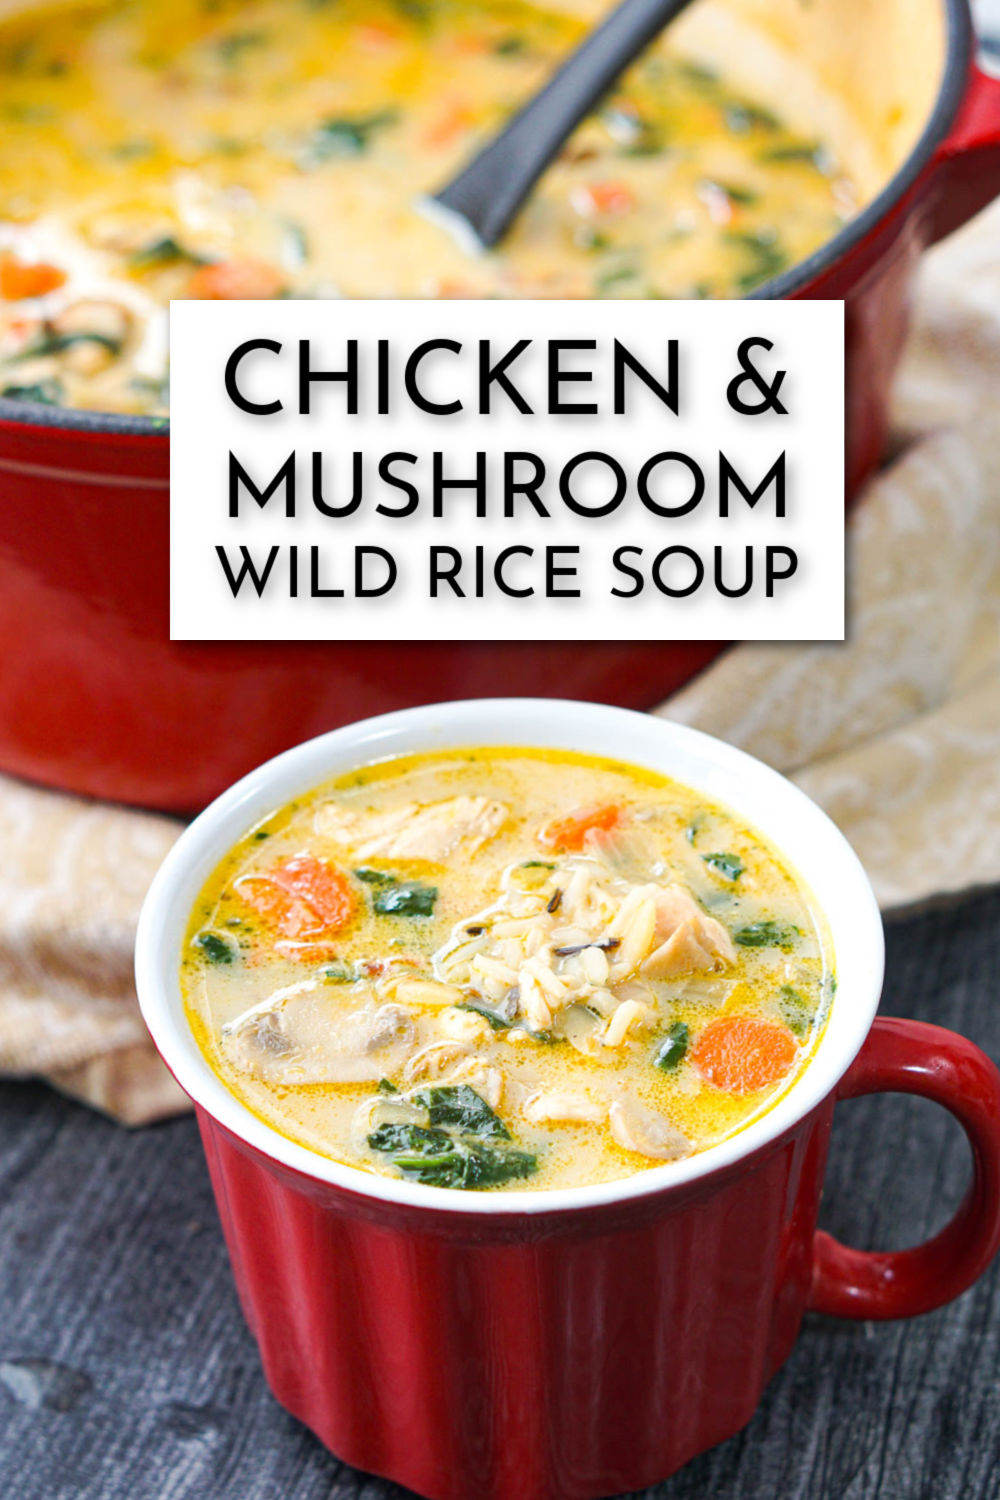 red mug and red dutch oven with creamy chicken and mushroom wild rice soup and text